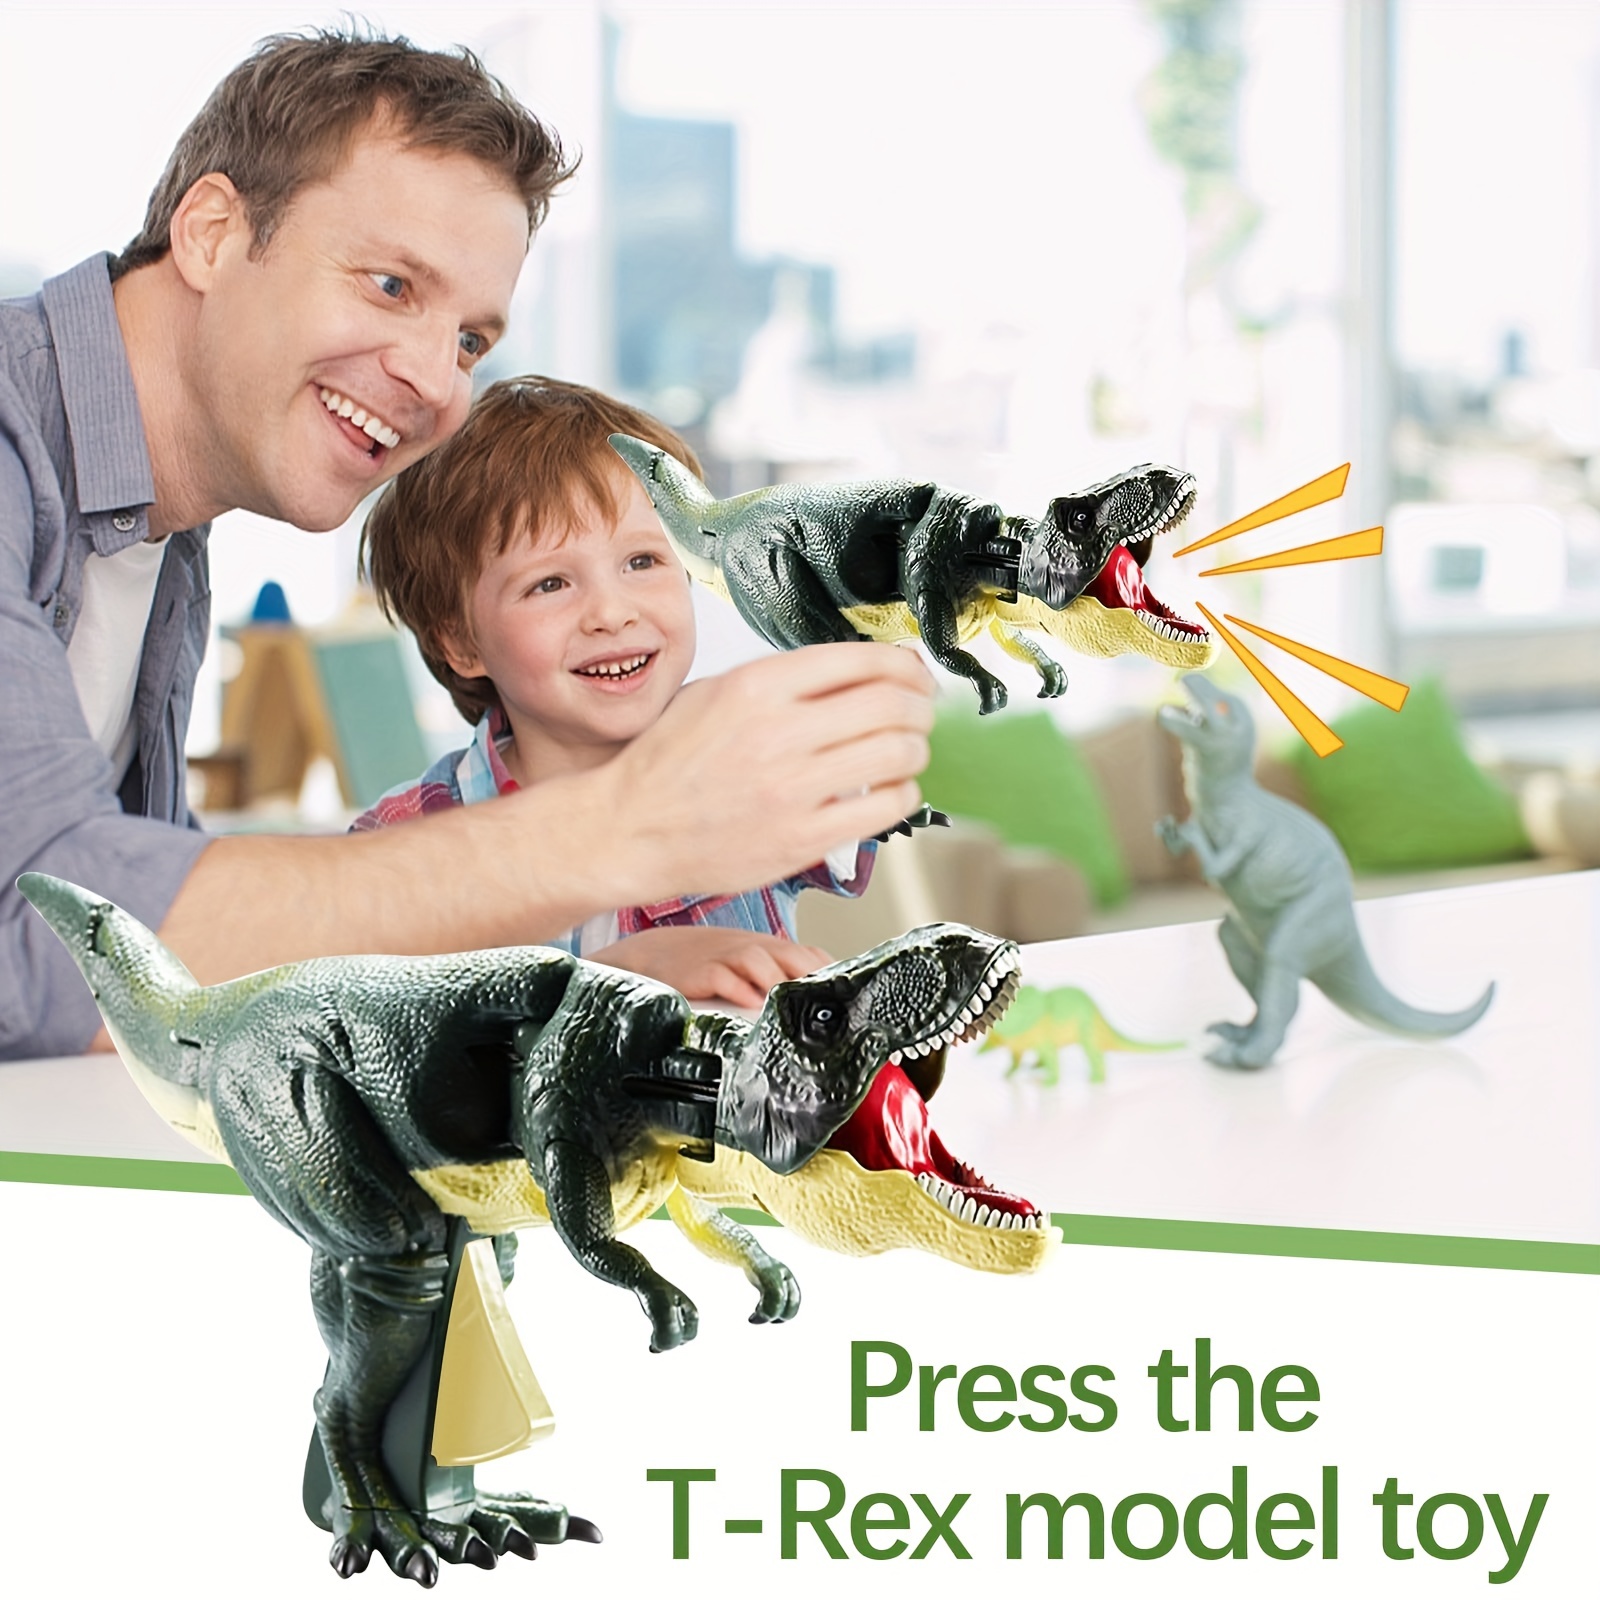  Maxcate Trigger The T-Rex 2023 Funny Dinosaur Toys,Dino Grabber  Toy,Dinosaur Chomper Toys,Dinosaur Snapper Robot Hand Pincher Dino Game  Novelty Gag Toy Gift for Halloween Christmas (Standard Edition) : Toys &  Games